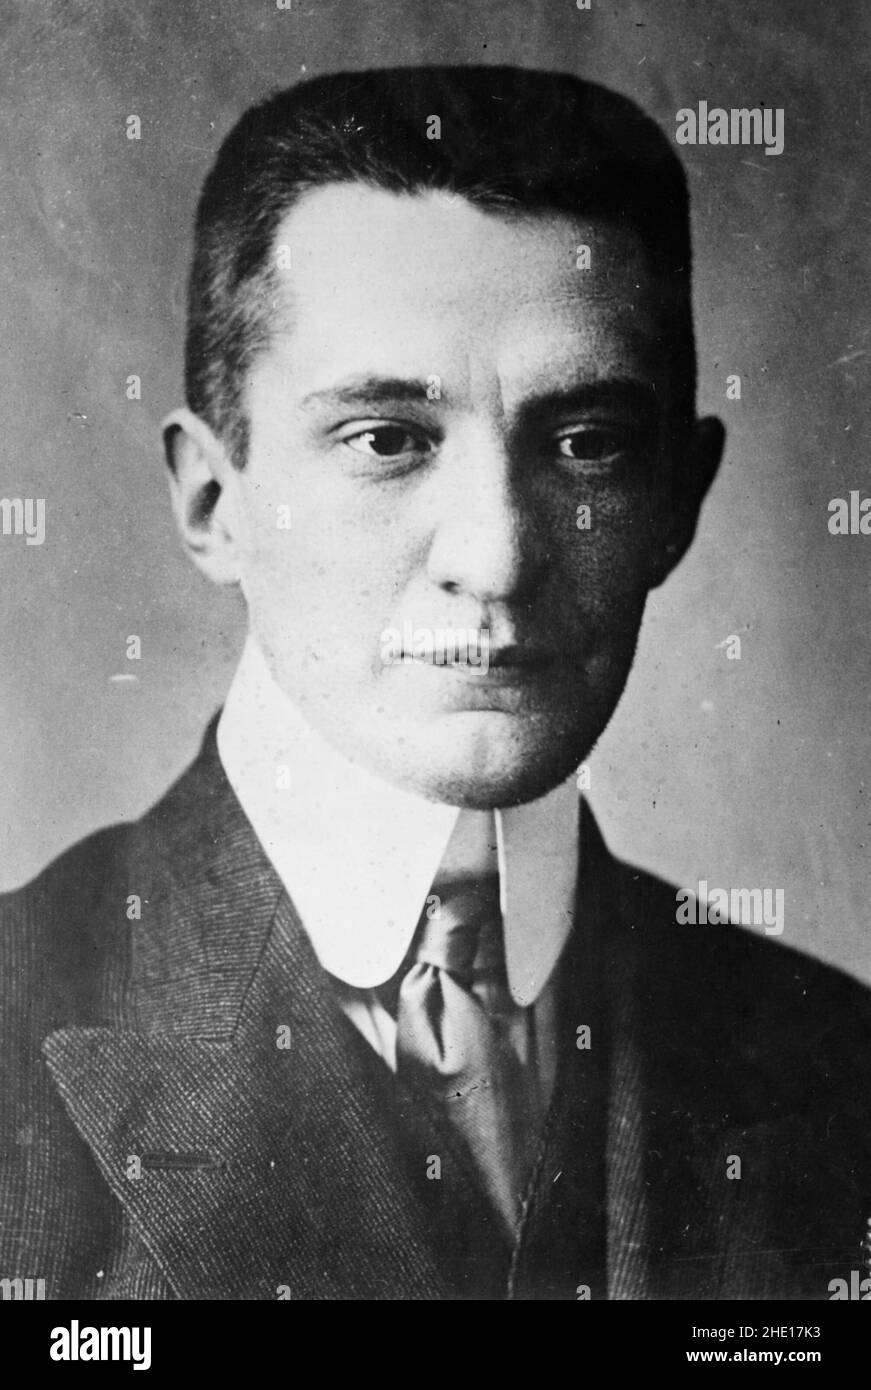 Alexander Kerensky who was a member of the Russian government after the February 1917 revolution until he was eposed by the bolshevik revolution in October 1917 Stock Photo